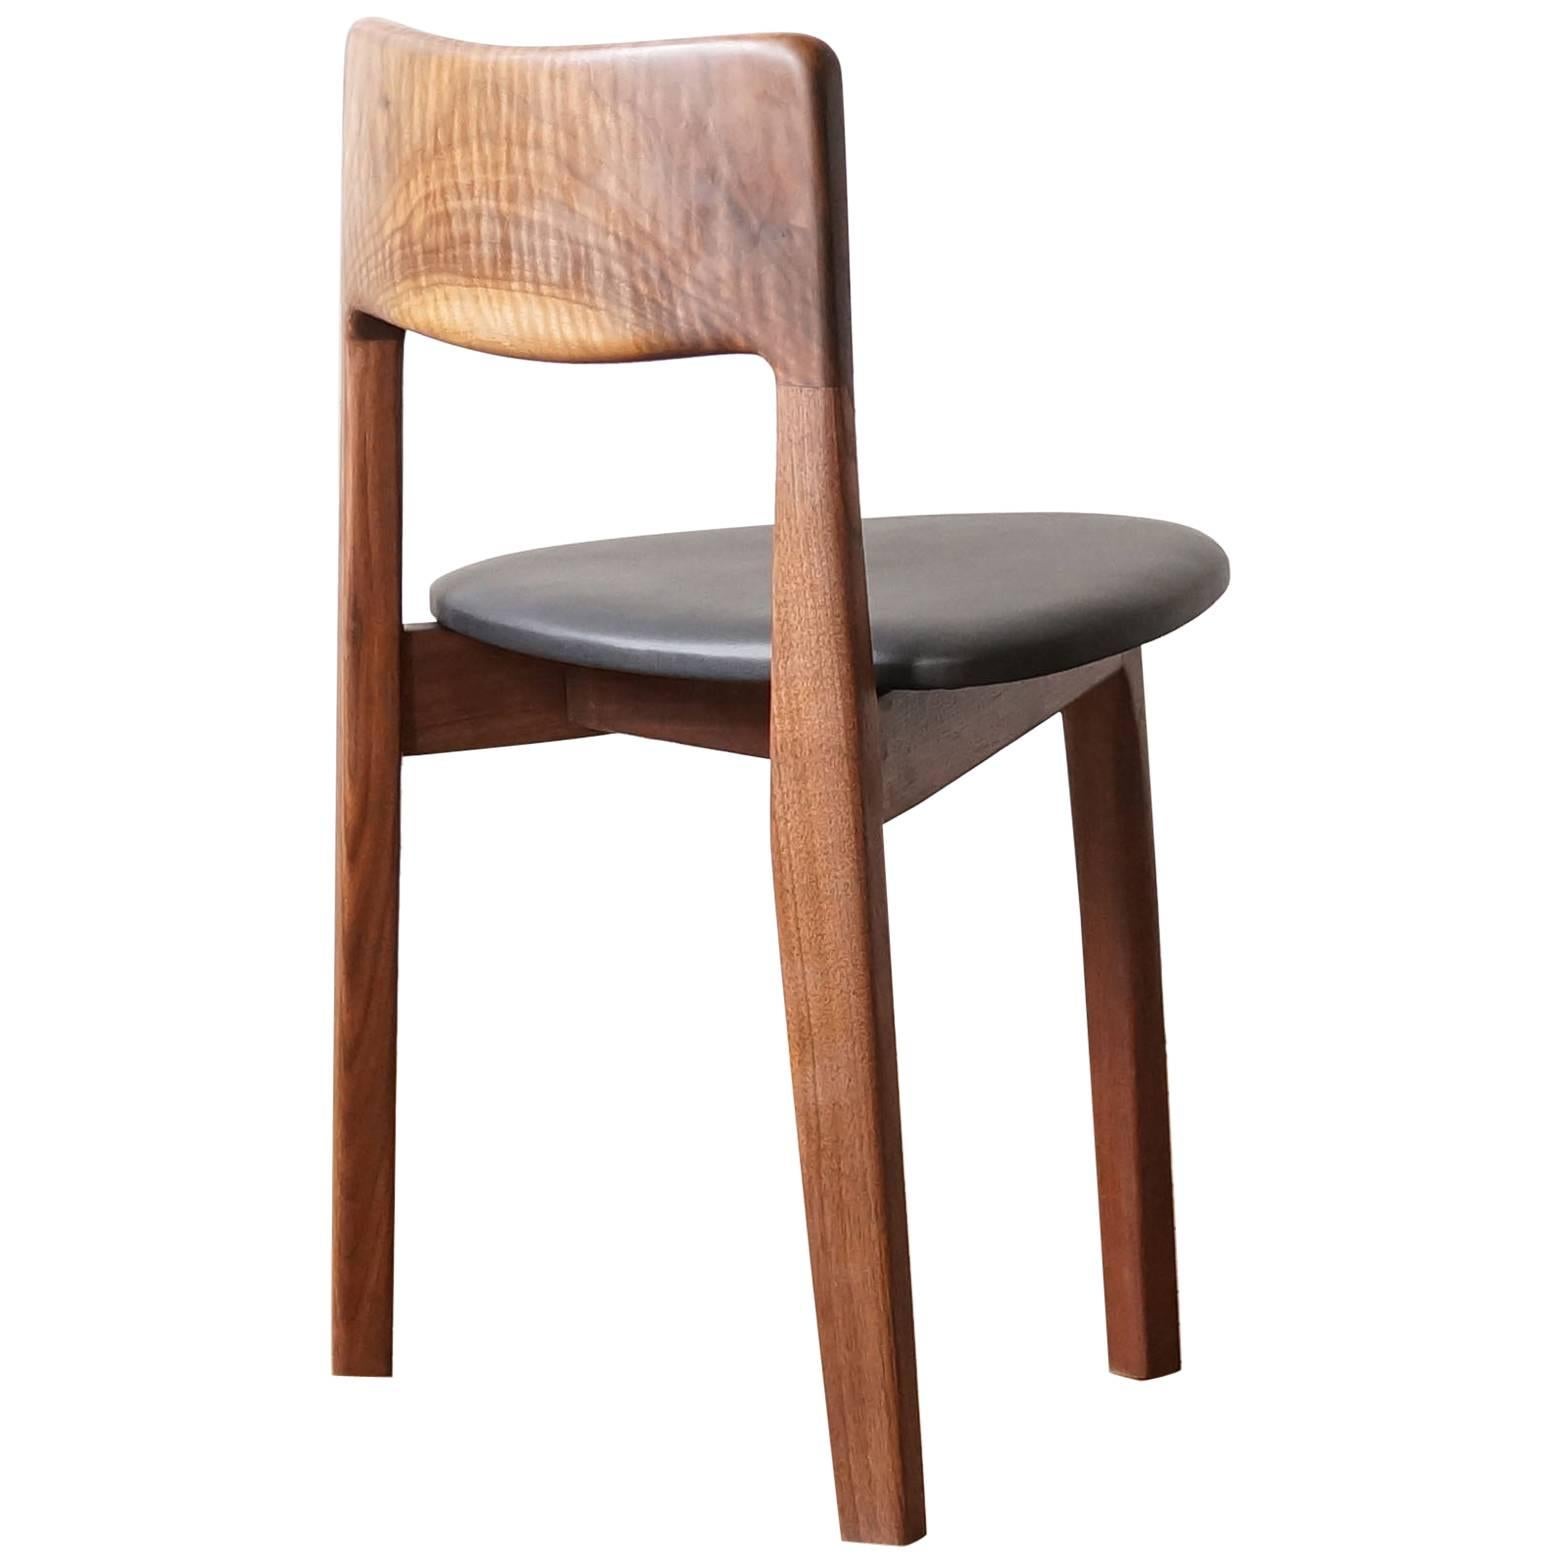 The C11 chair is a three-legged solid hardwood side chair, meant to pair perfectly with our round T08 table but with a unique sculptural presence on its own as well. The angled back legs and the hand shaped seat back are oriented so that they